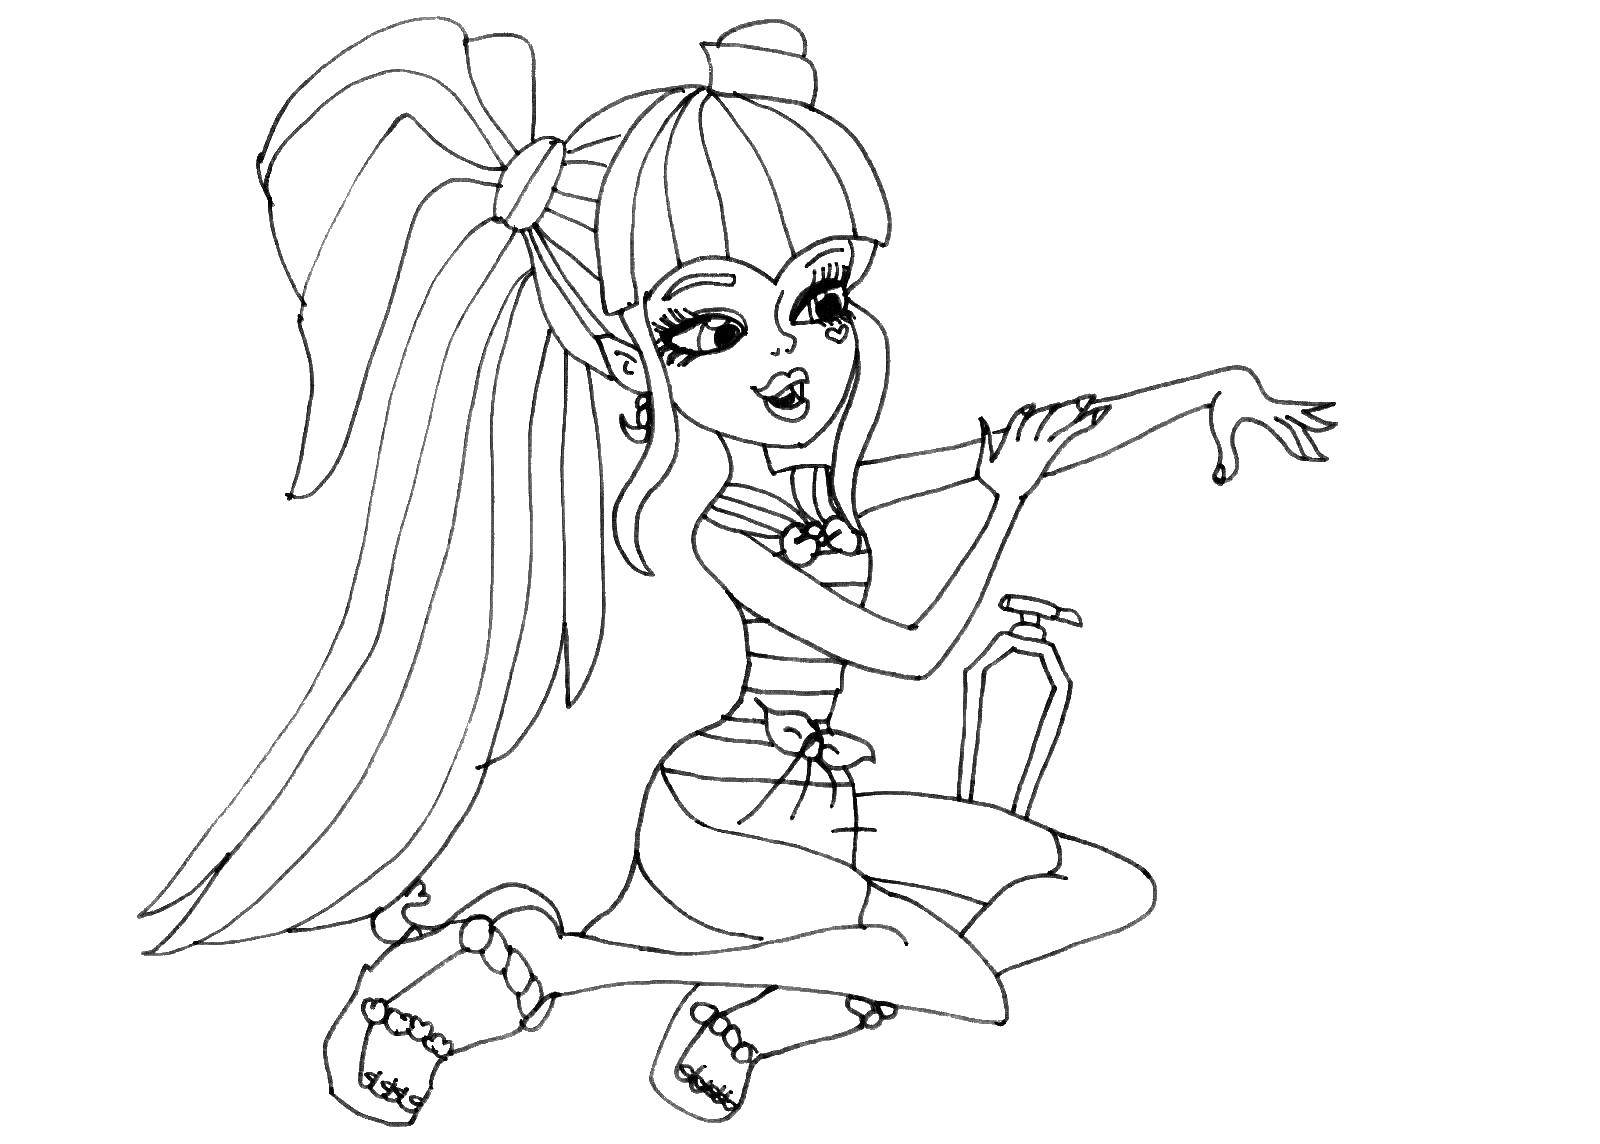 Coloring Monster high. Category Monster High. Tags:  Monster high, doll, cartoon.